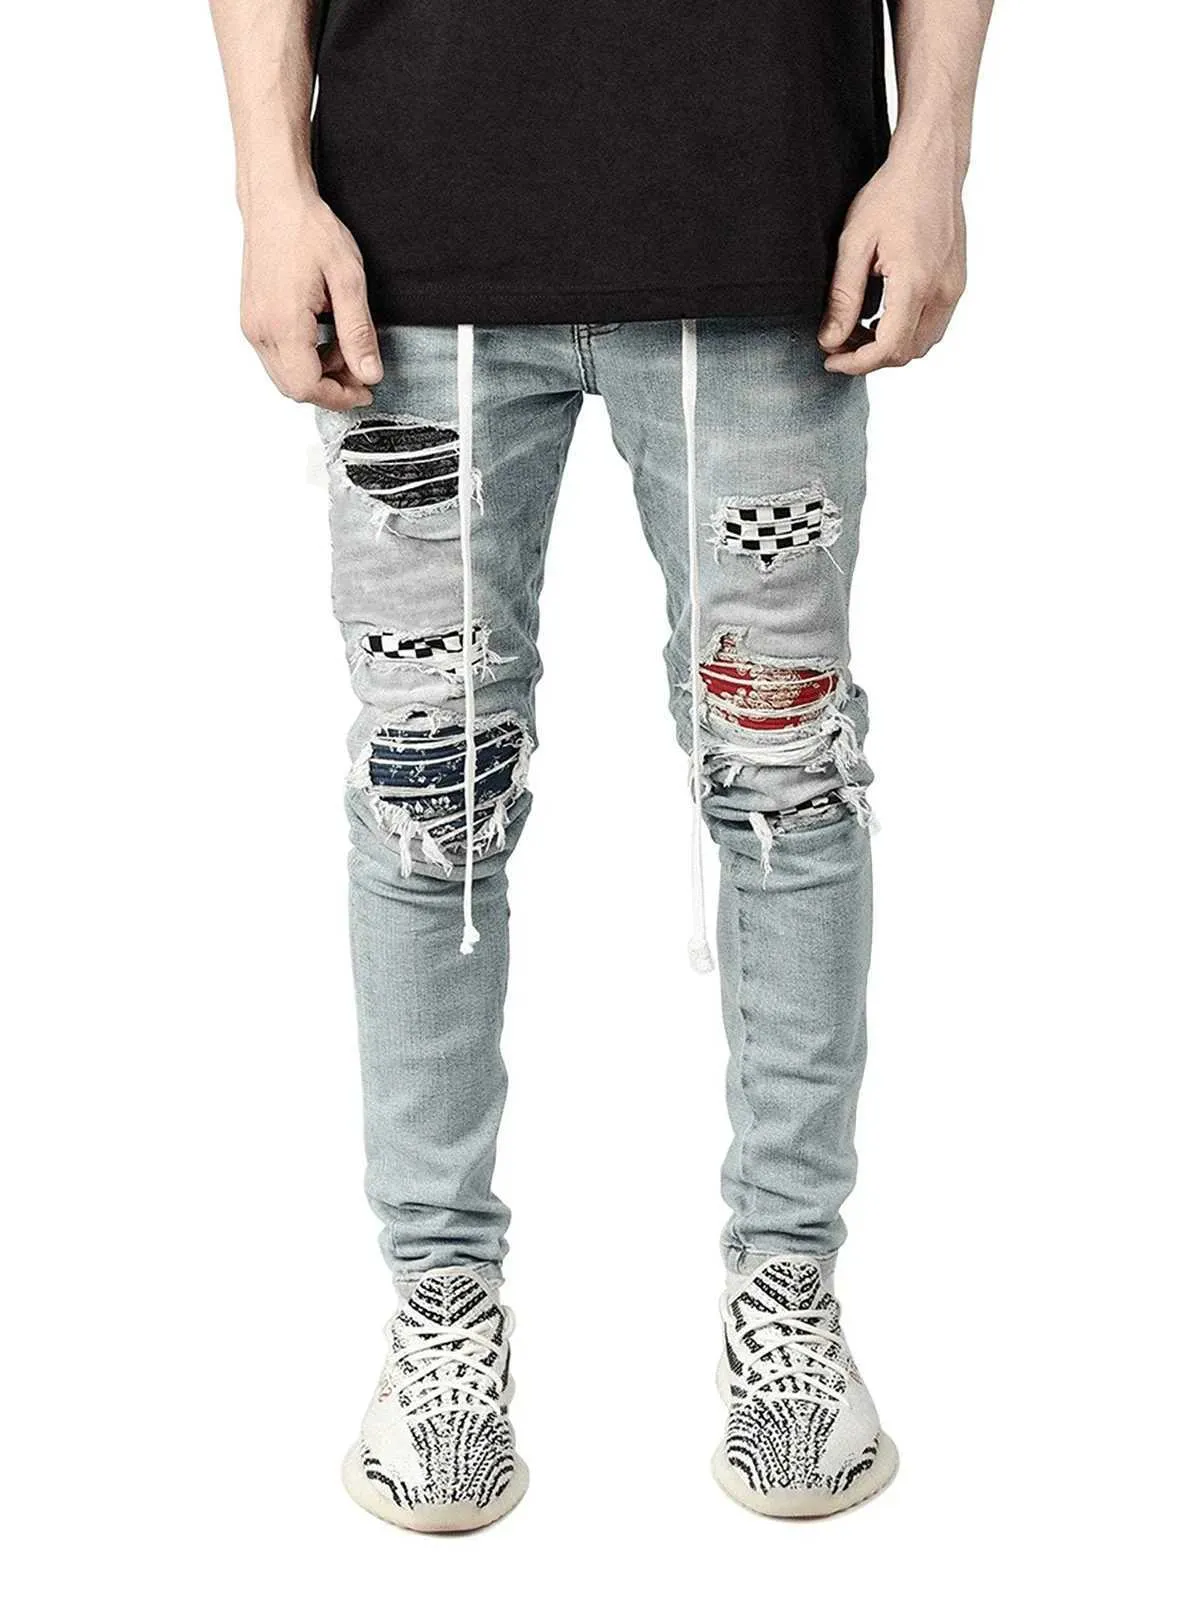 Hot New Skinny Jeans Men Strtwear Destroyed Ripped Jeans Homme Hip Hop Male Pencil Pants Embroidery Patch Fashion Denim Pants